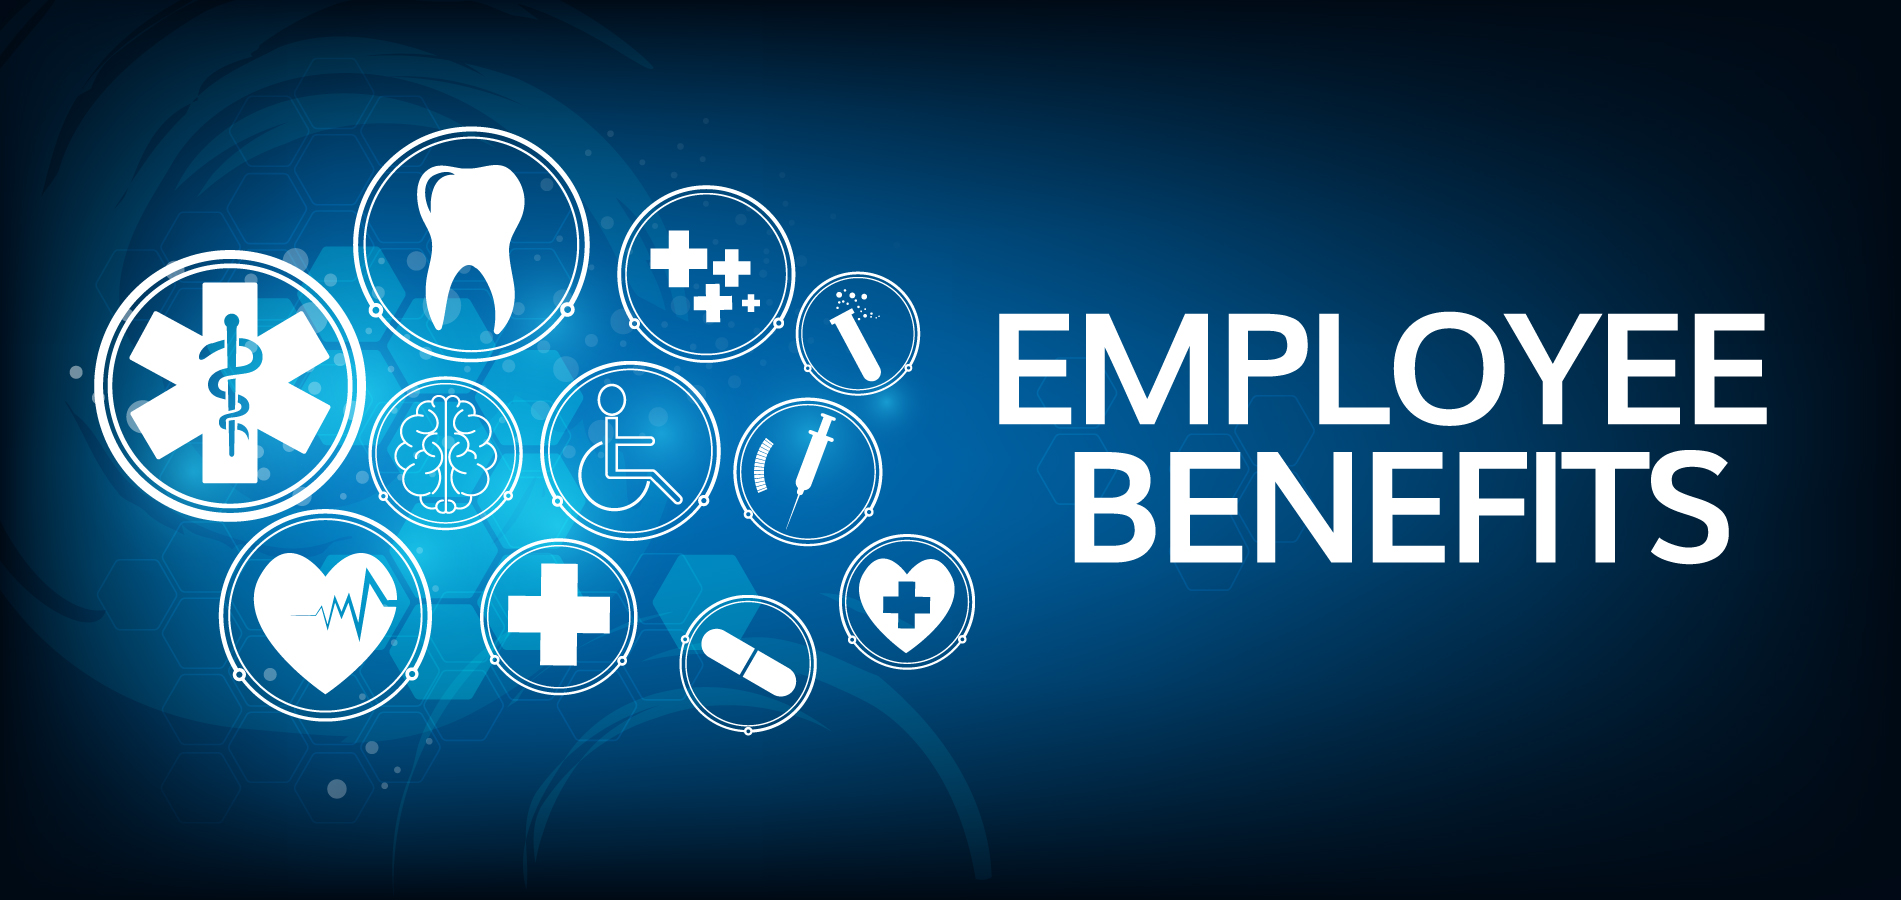 Health and dental coverage for employee benefits